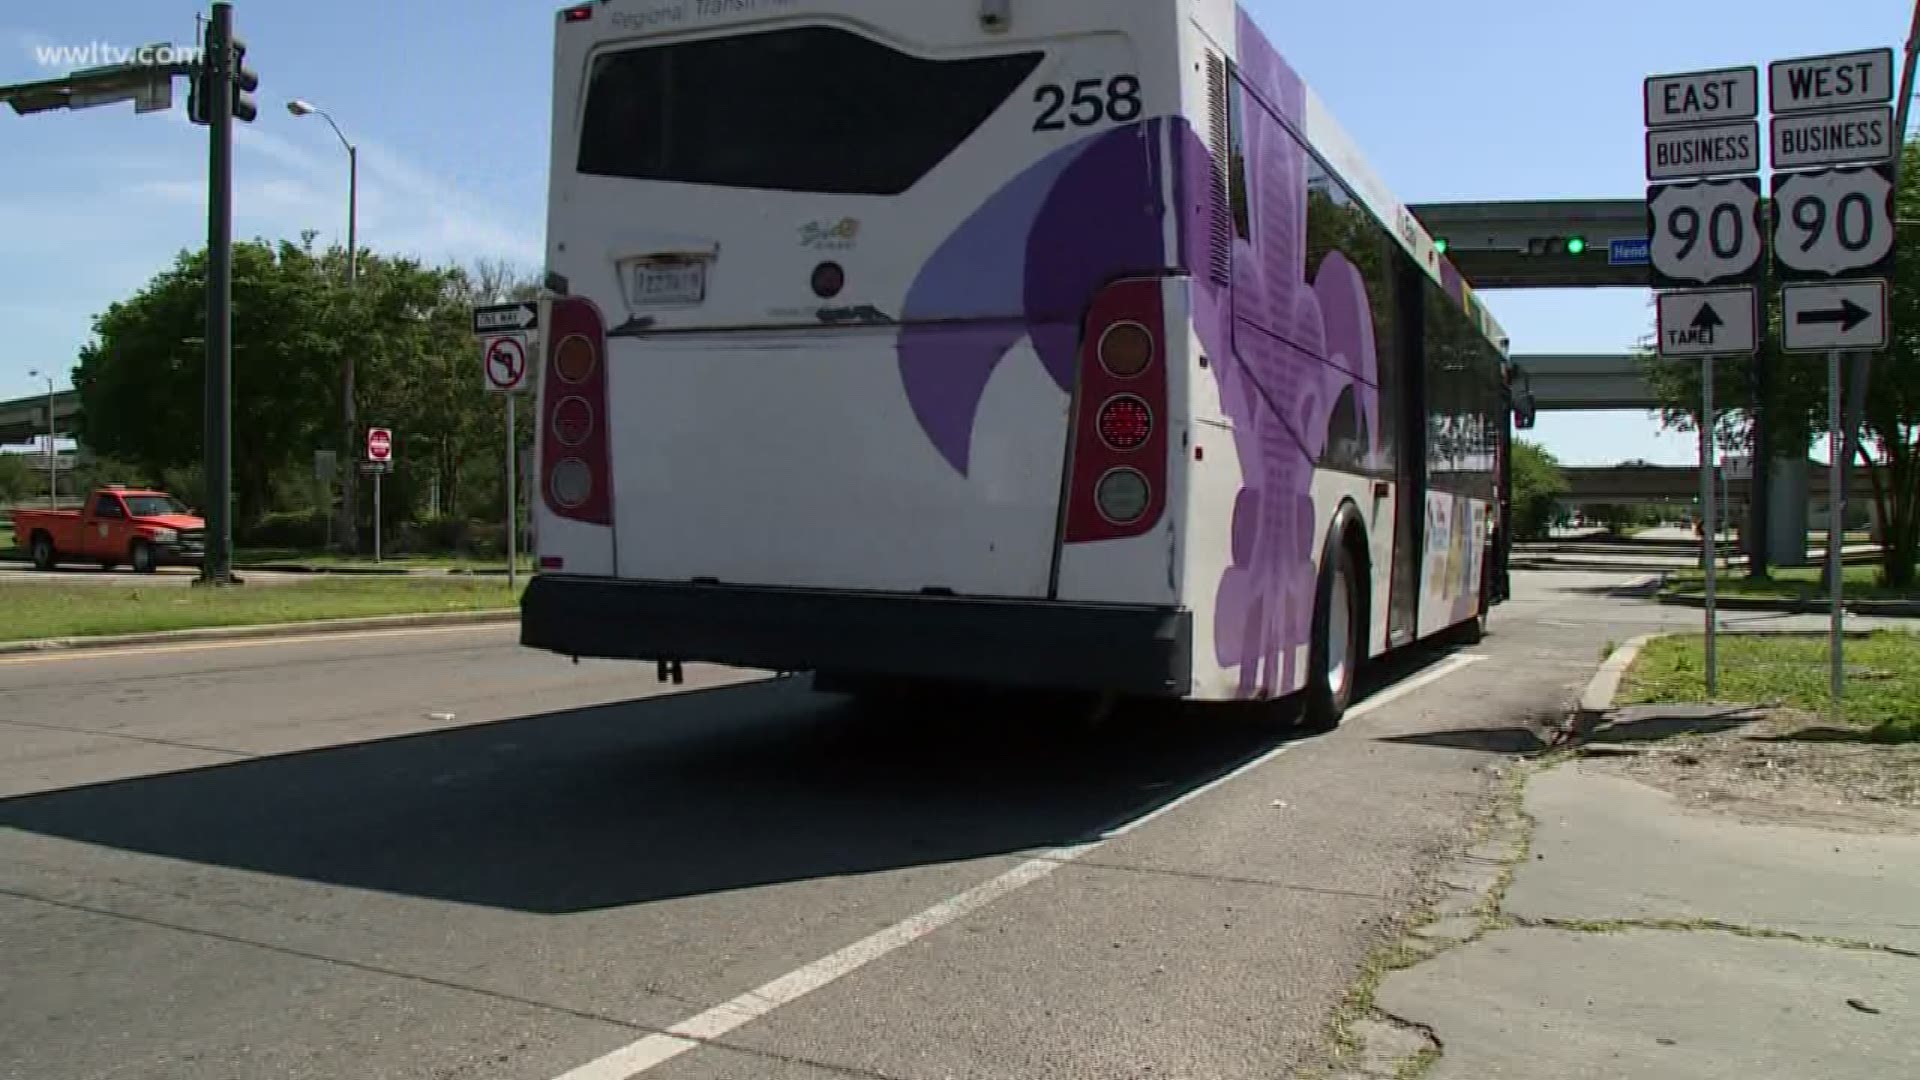 After a man was killed in a hit-and-run at a bus stop, citizens are calling for more safety for public transit riders.